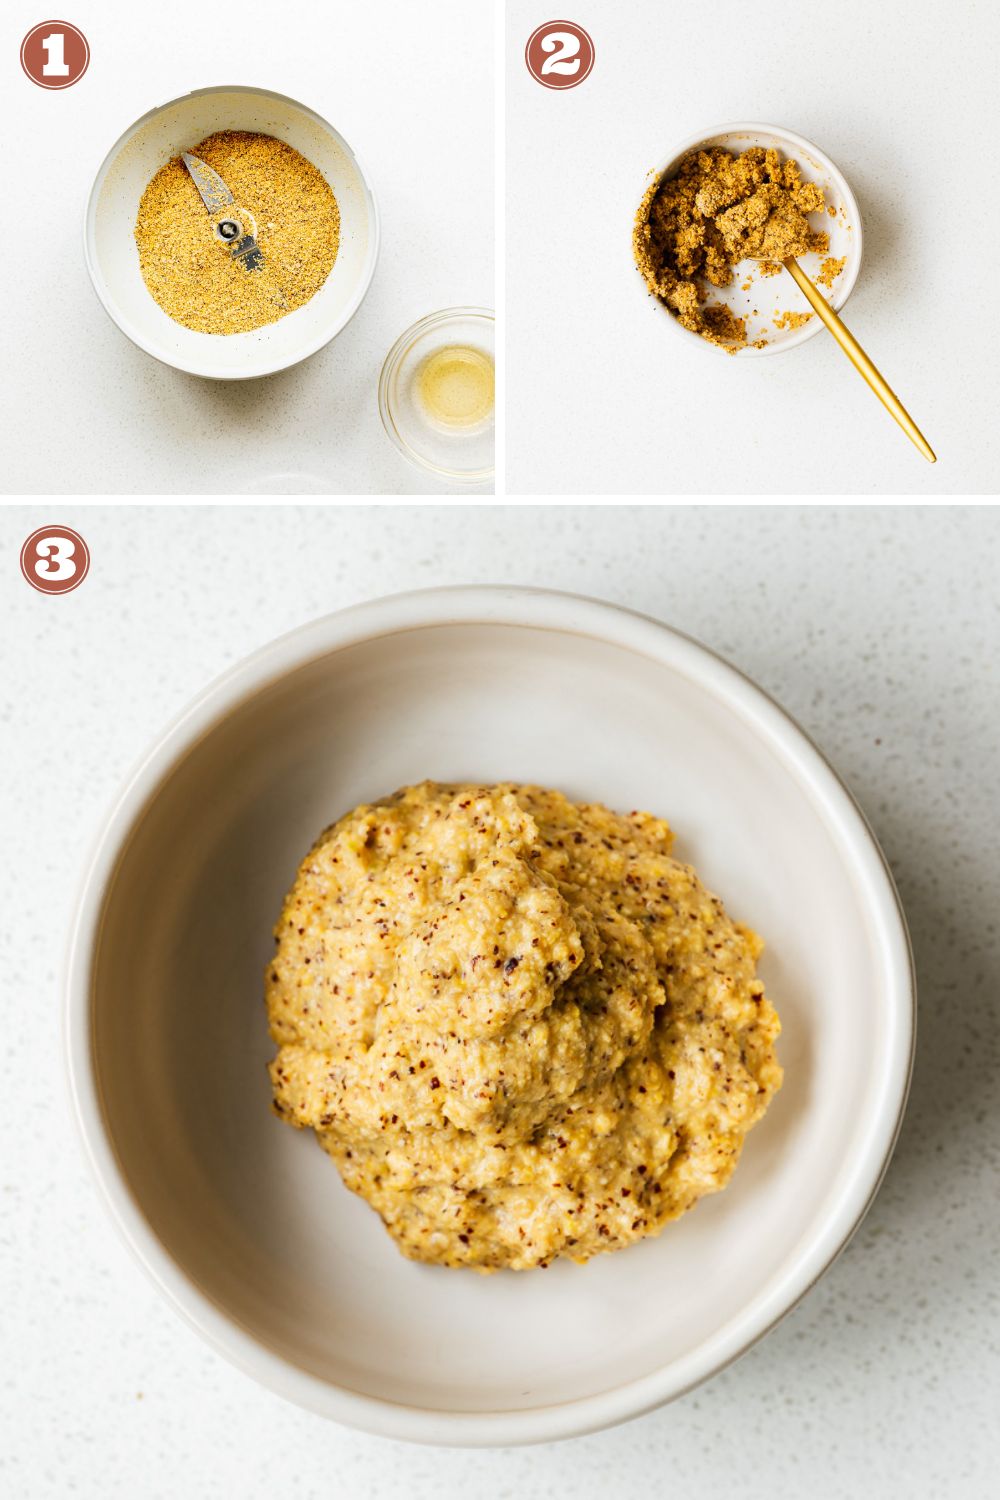 How to make Dijon mustard by grinding mustard seeds and mixing it with white wine vinegar, salt and water.